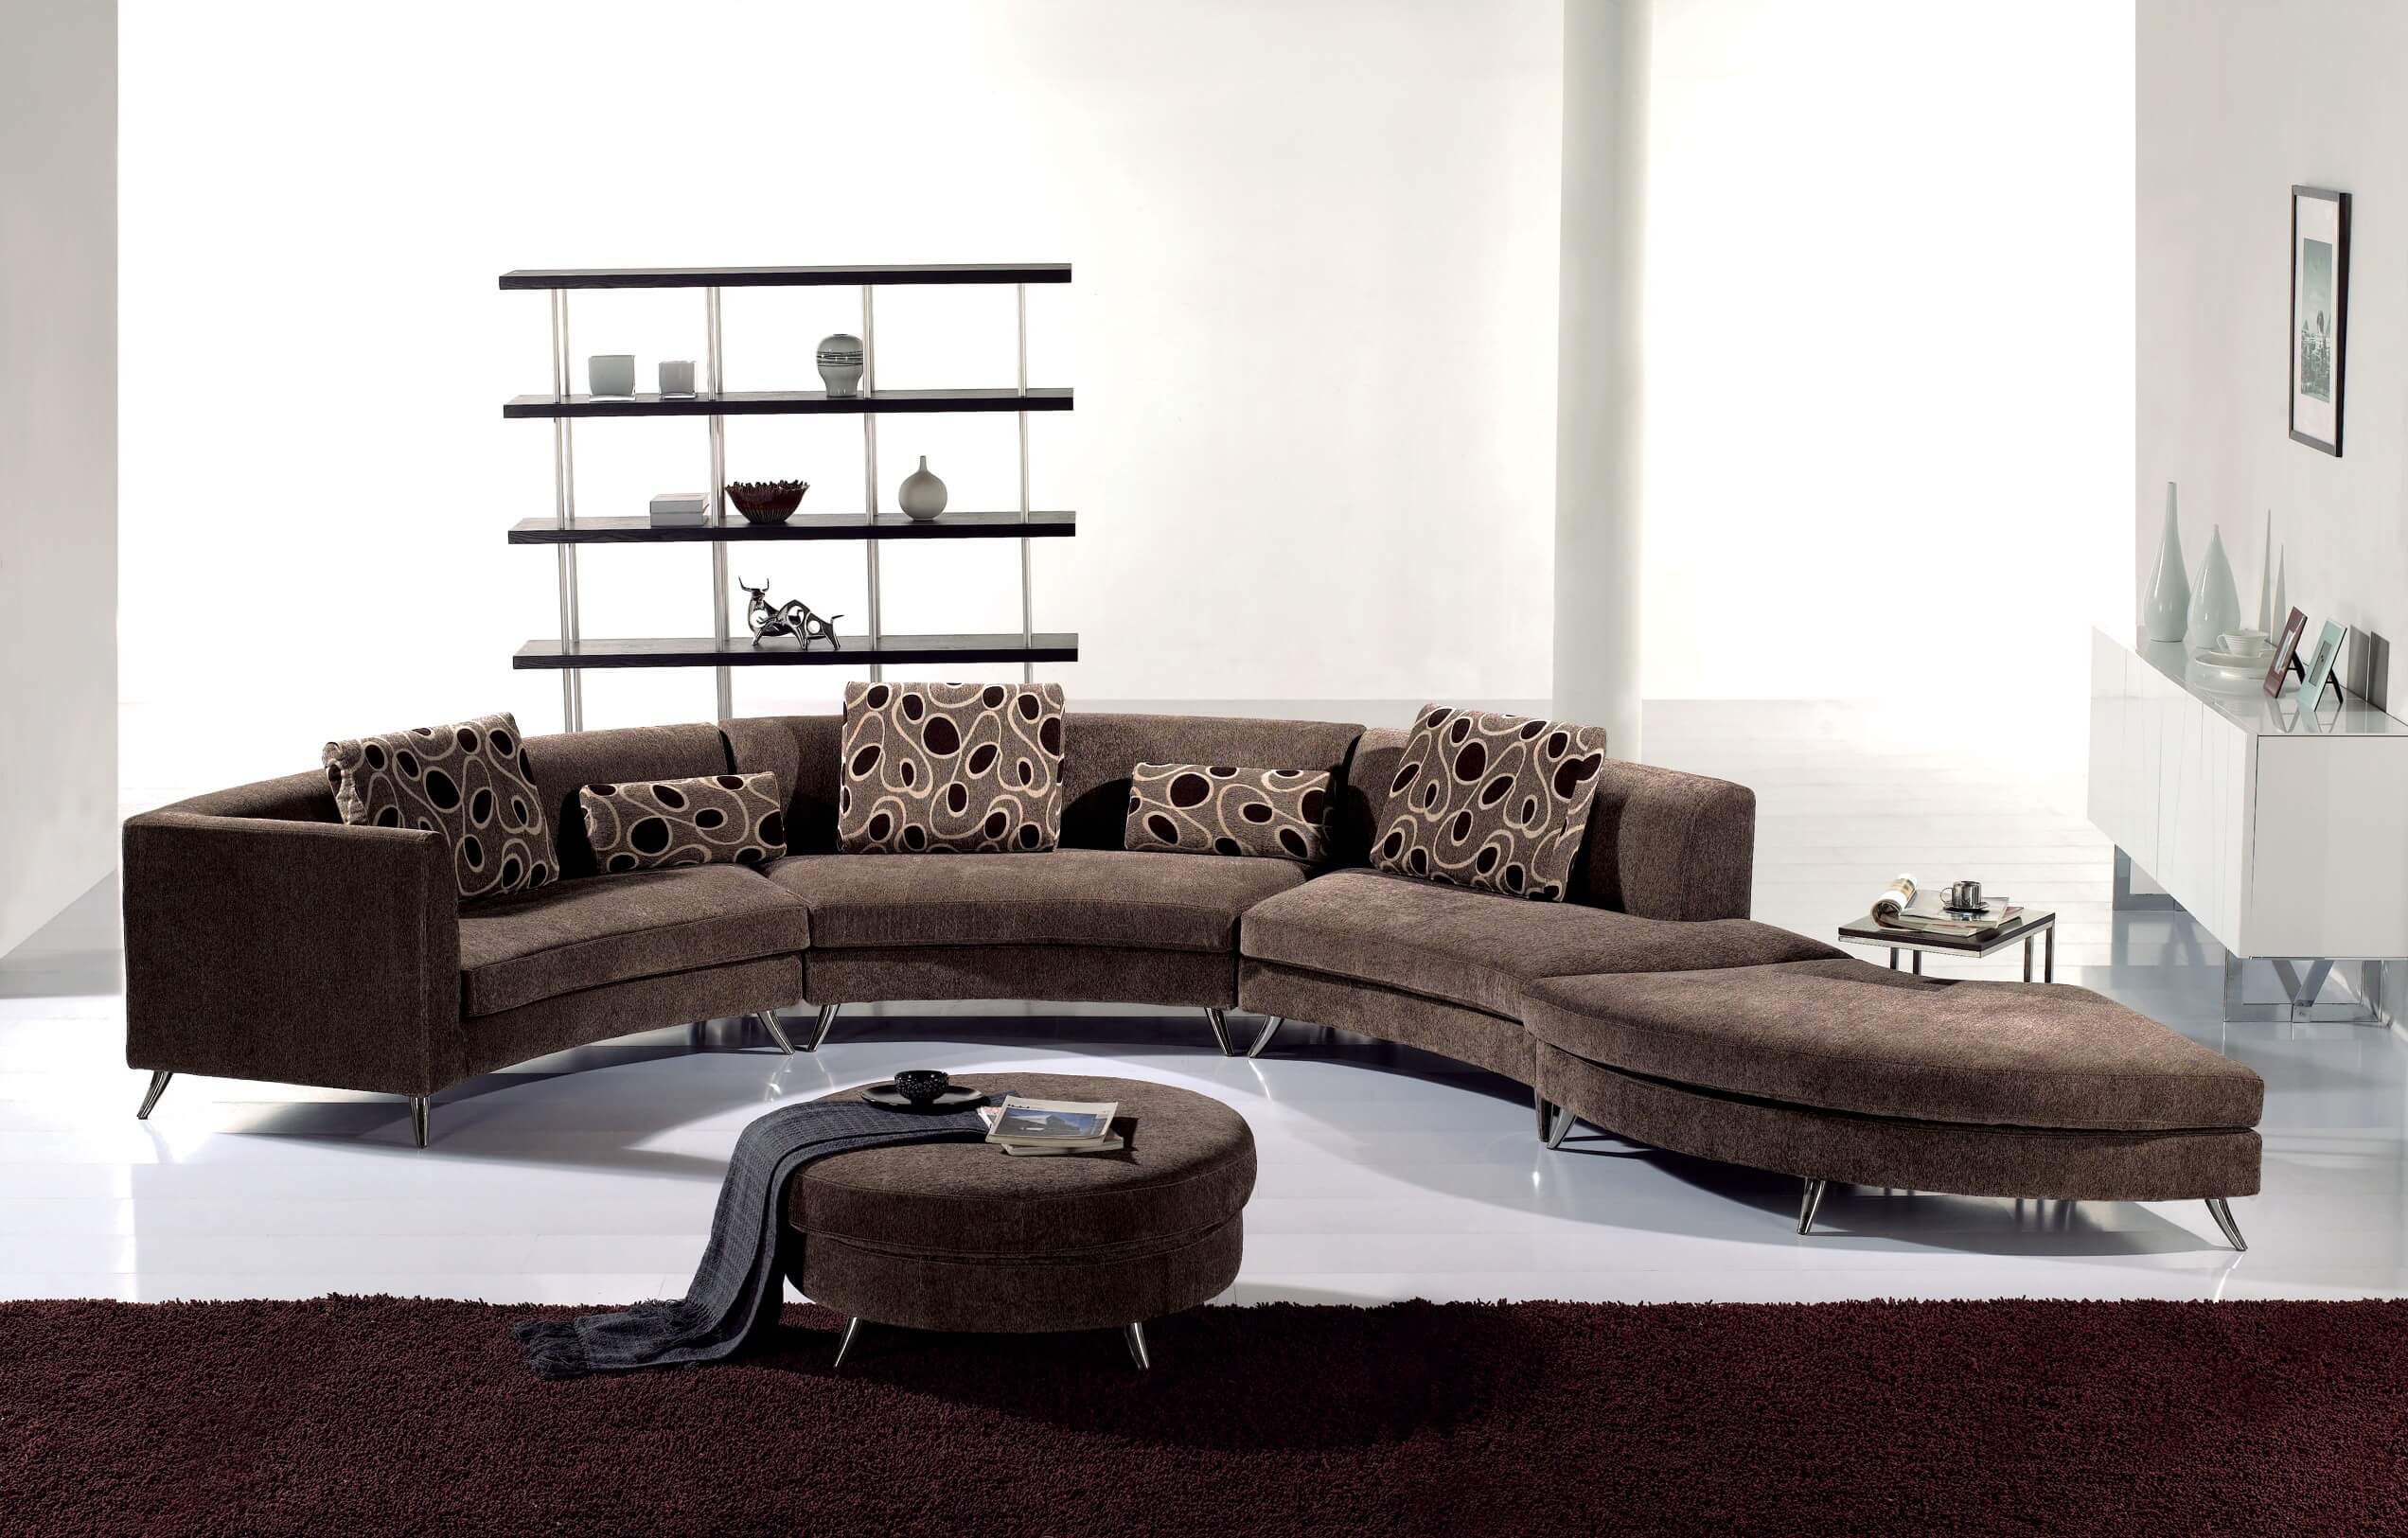 couch sofa sofas unique modern furniture sectional cool half designs stylish circle couches curved italian classic piece stunning collect leather